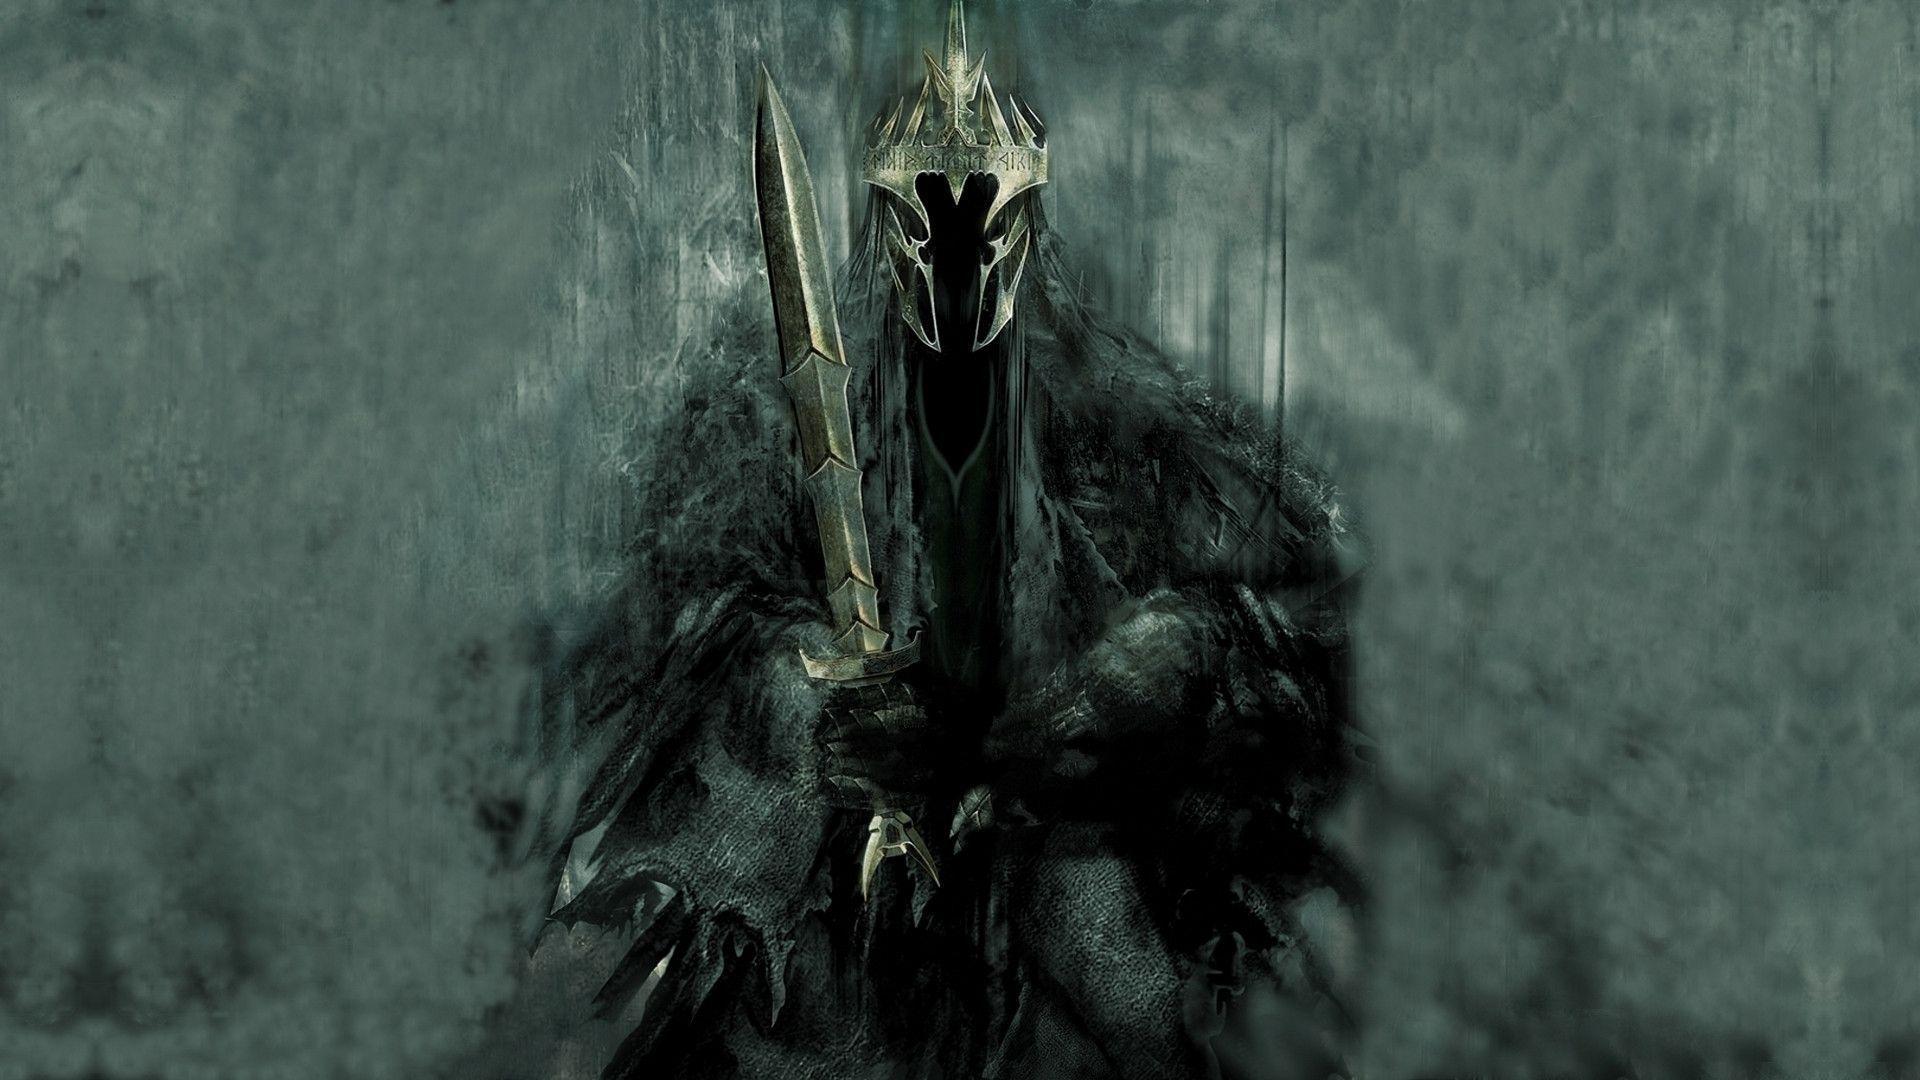 THE WITCH KING full HD of the Rings Wallpaper 24642297